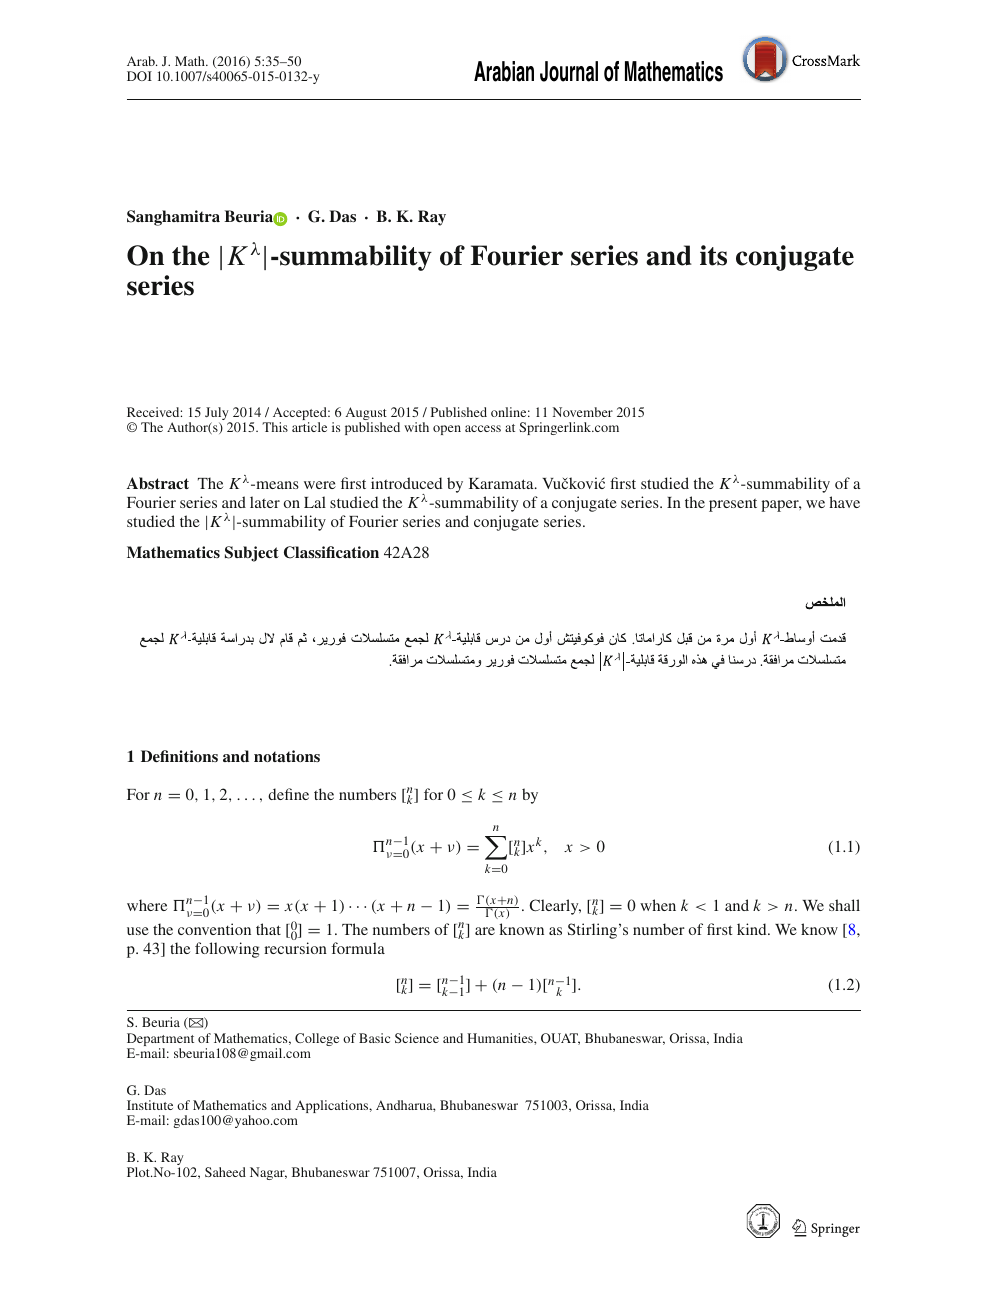 On The K L Summability Of Fourier Series And Its Conjugate Series Topic Of Research Paper In Mathematics Download Scholarly Article Pdf And Read For Free On Cyberleninka Open Science Hub